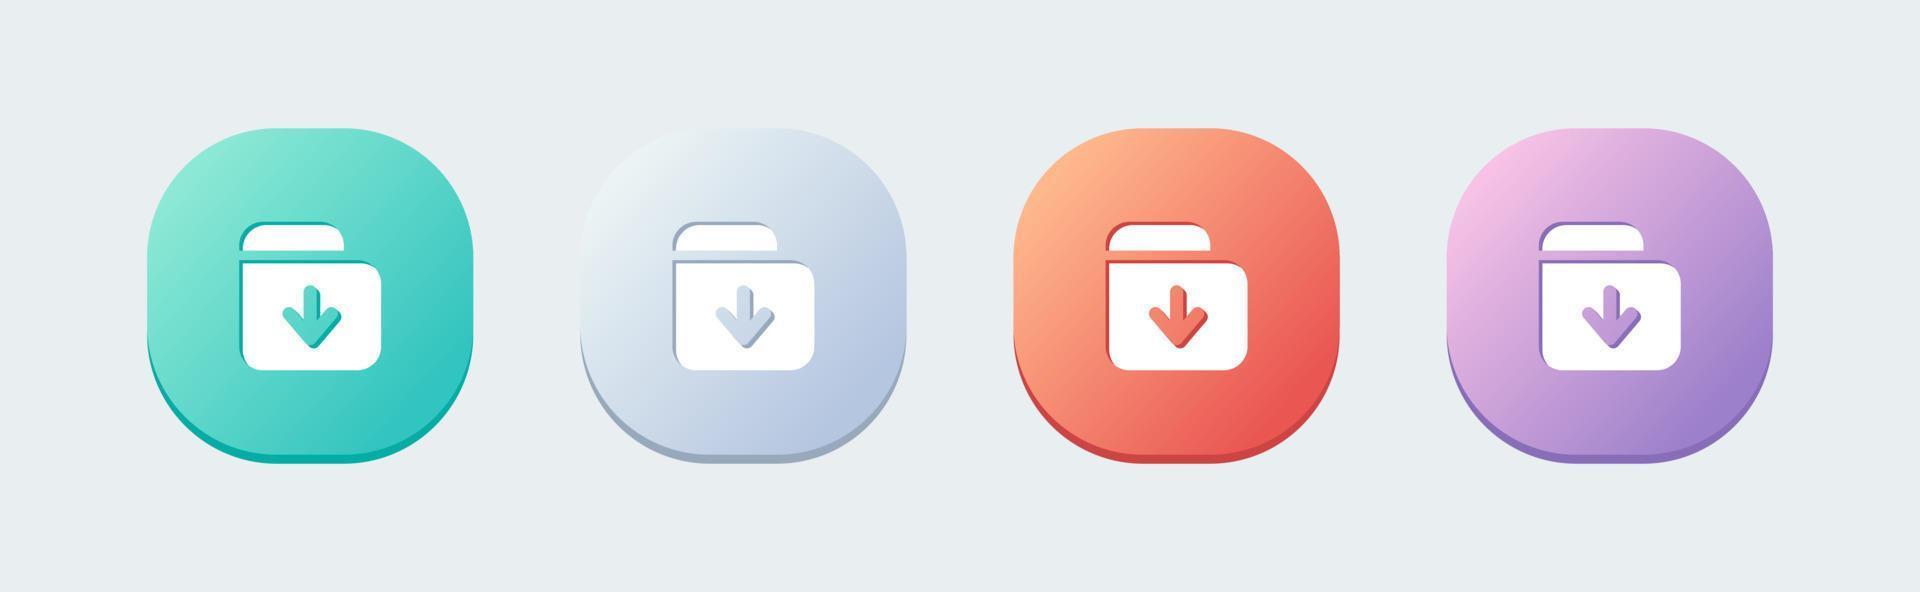 Archive solid icon in flat design style. Folder signs vector illustration.